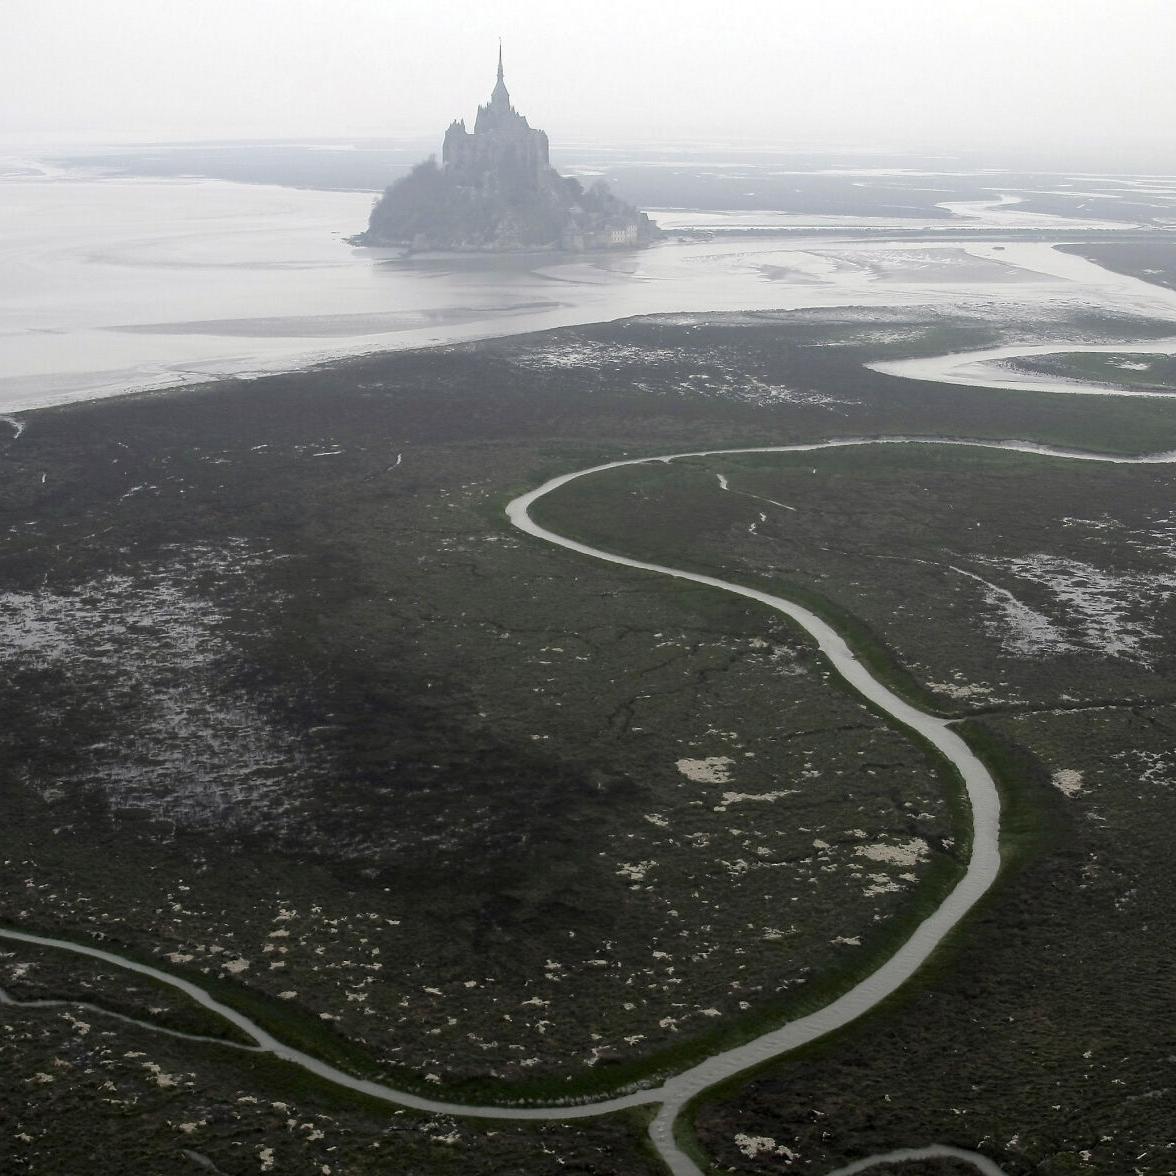 An architectural review of Mont Saint-Michel, Commune in France 